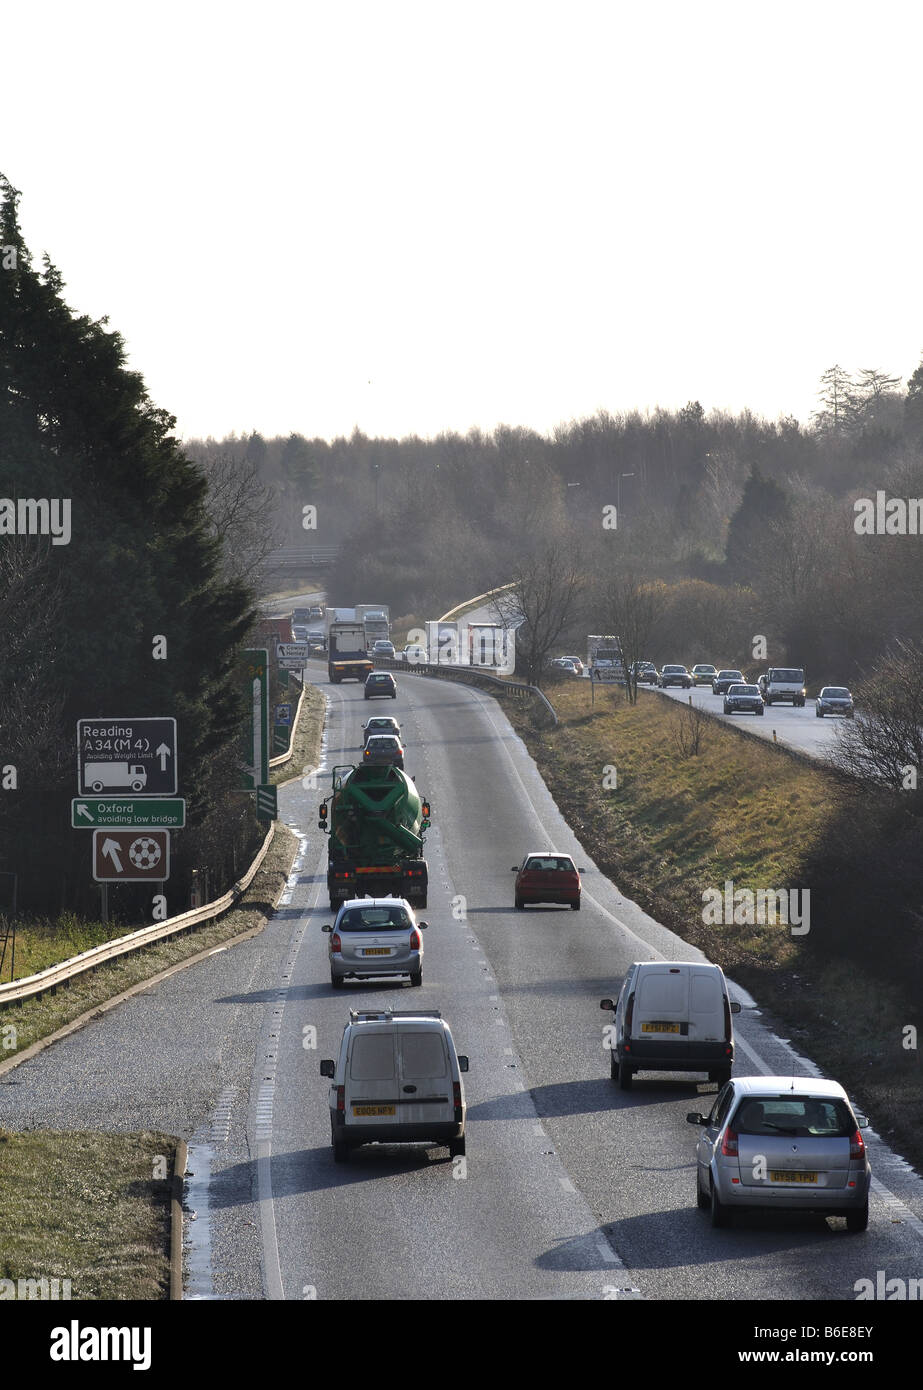 A34 Road in South Hinksey, Oxford, England, UK Stockfoto